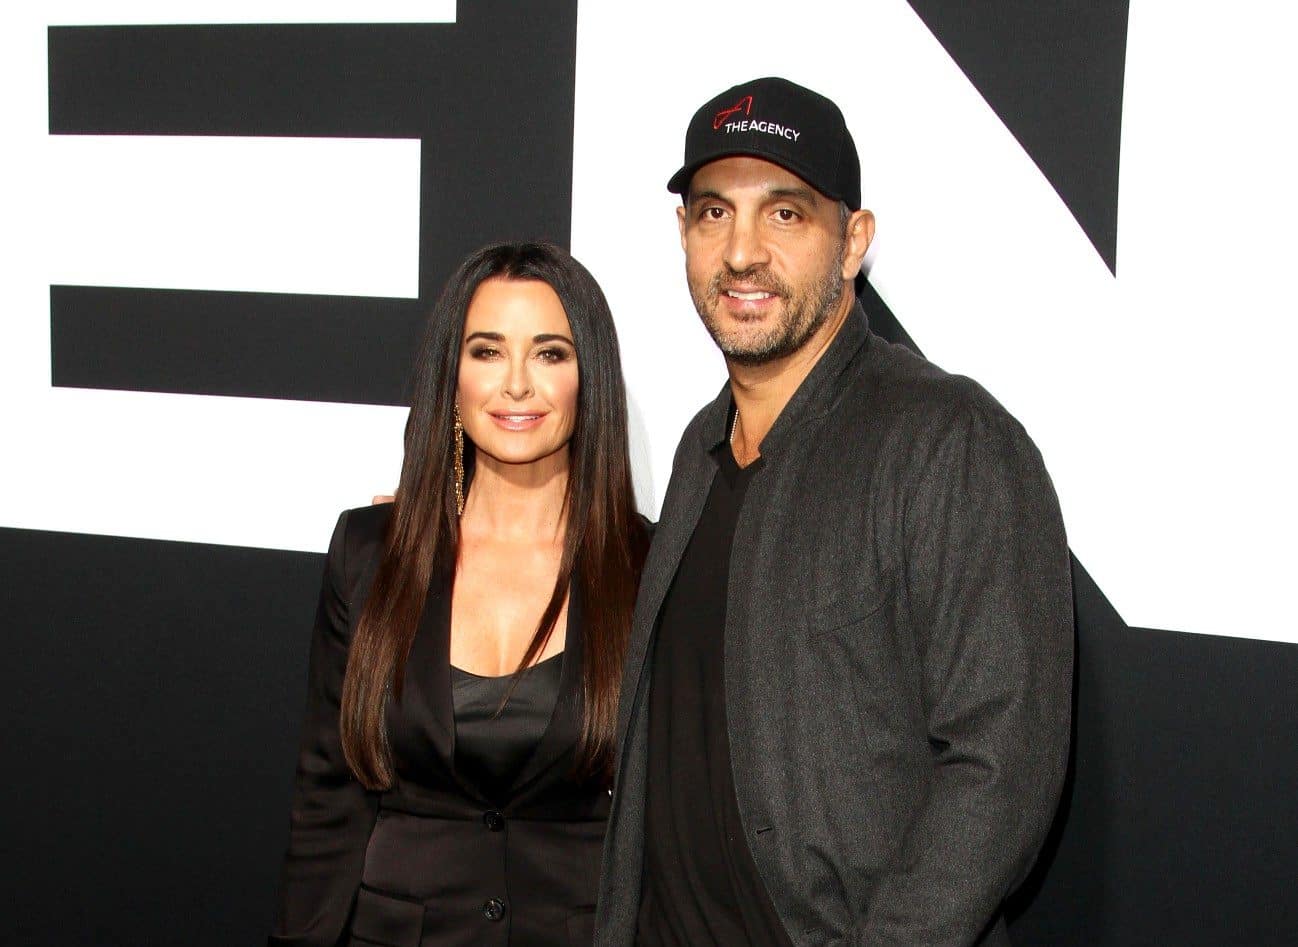 Mauricio Umansky Hinted at Marriage Problems Amid His and Kyle's "Very Busy" Lives Months Ago, Plus Kyle Will Appear on Buying Beverly Hills Season 2